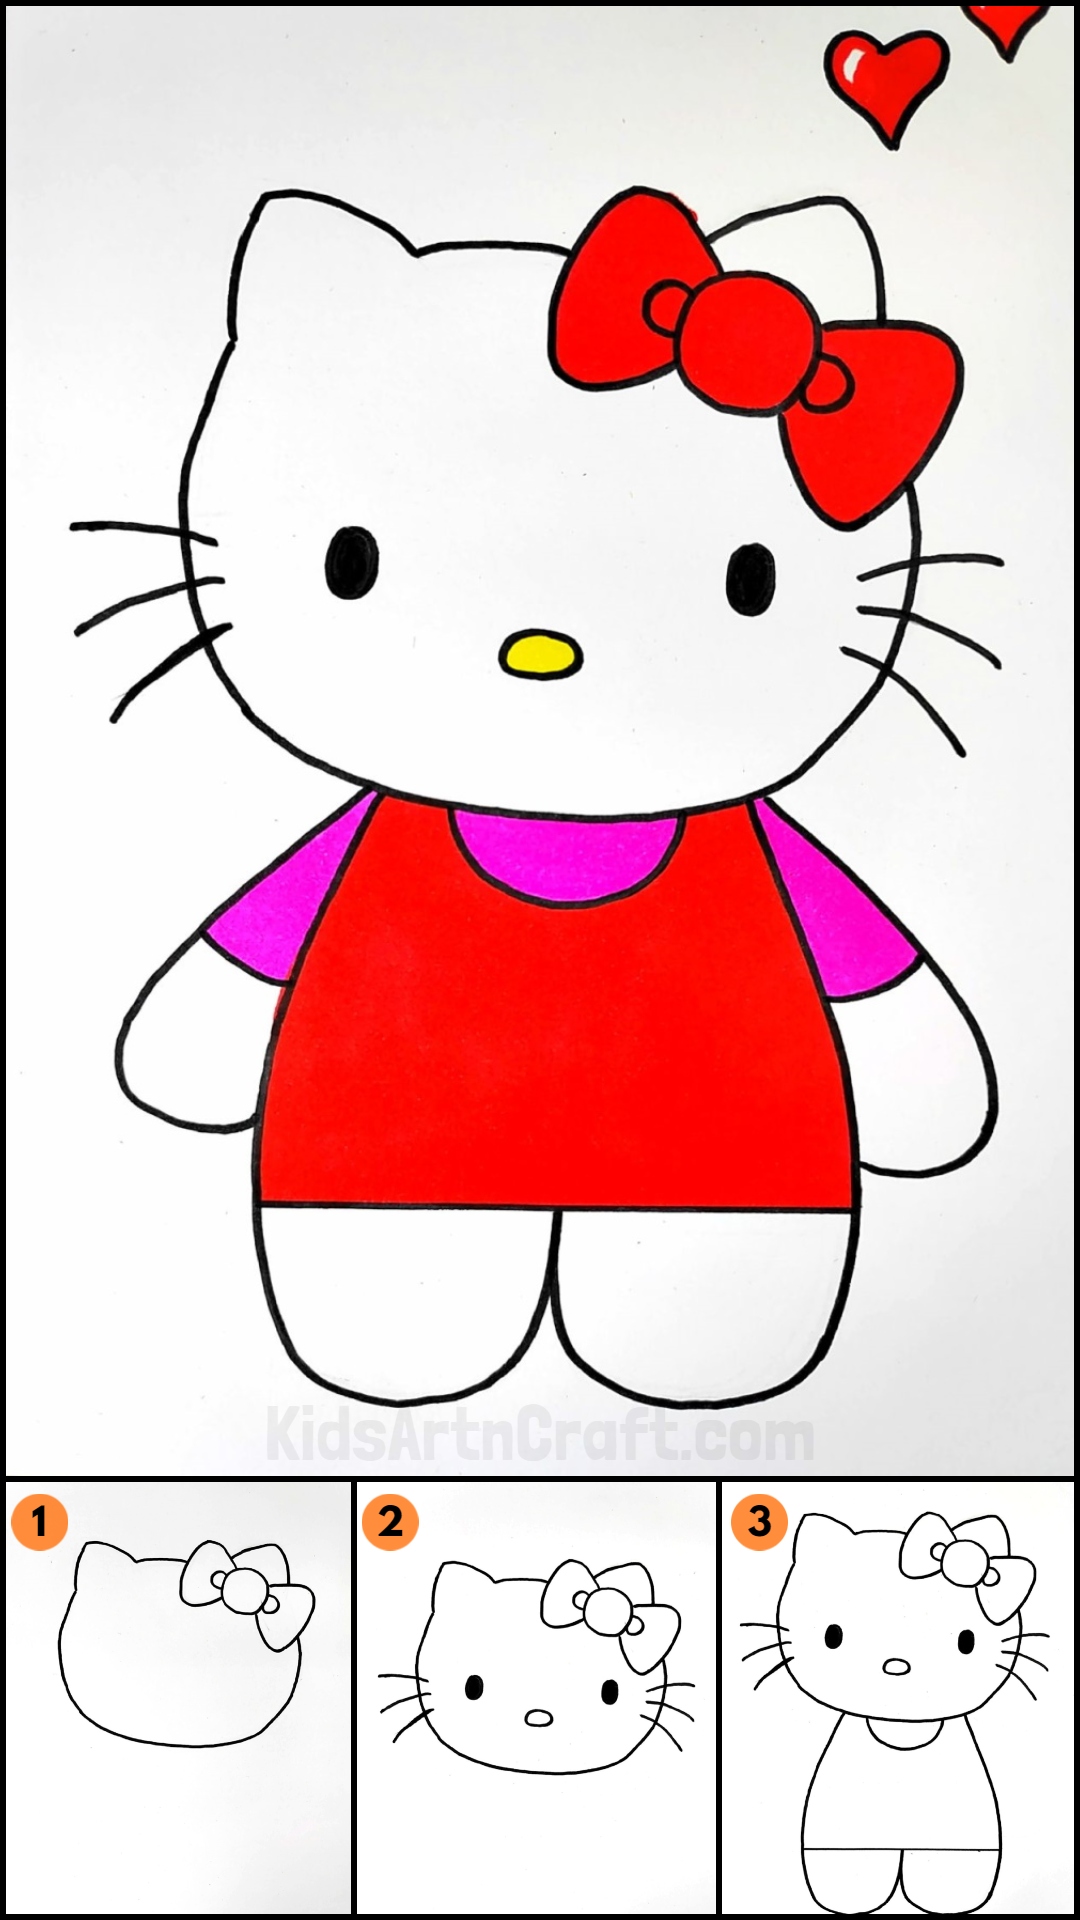 How to Draw a Cartoon Cat for Kids